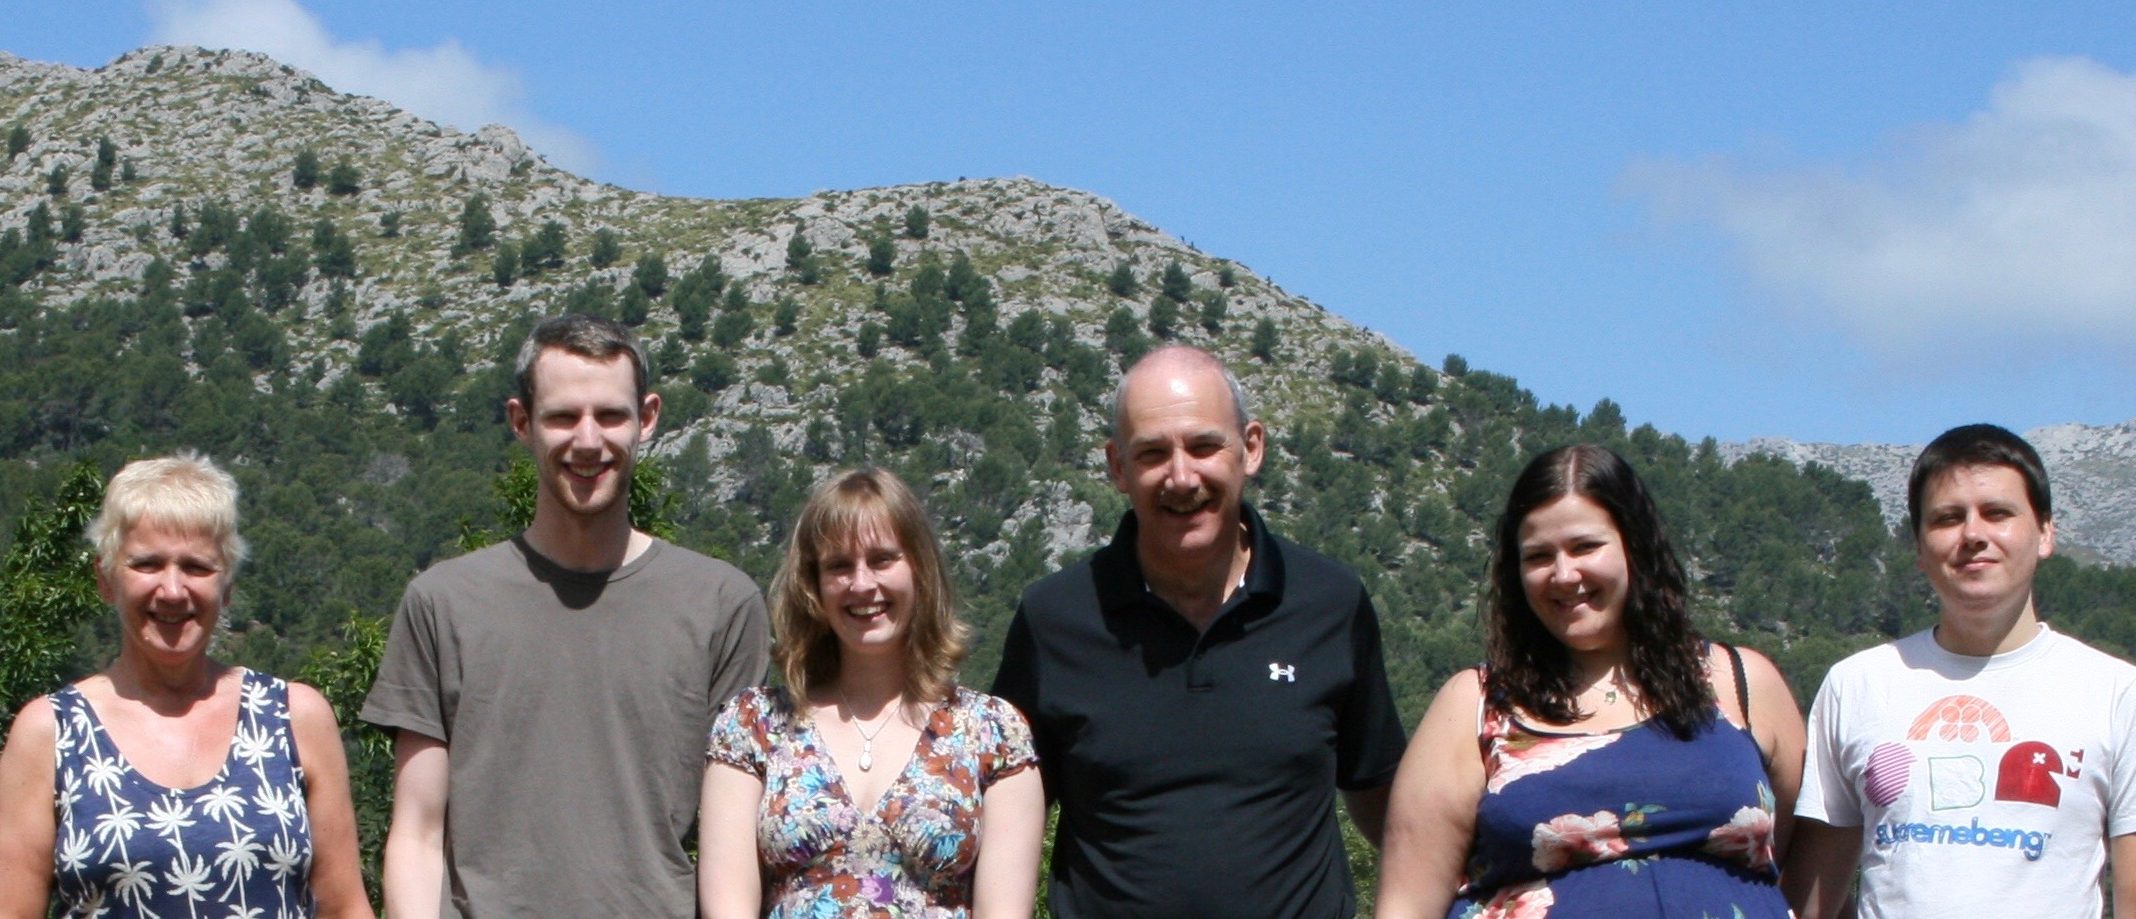 Anne, David, Laura, Roger, Lynne and James on a family holiday to Majorca in 2010.